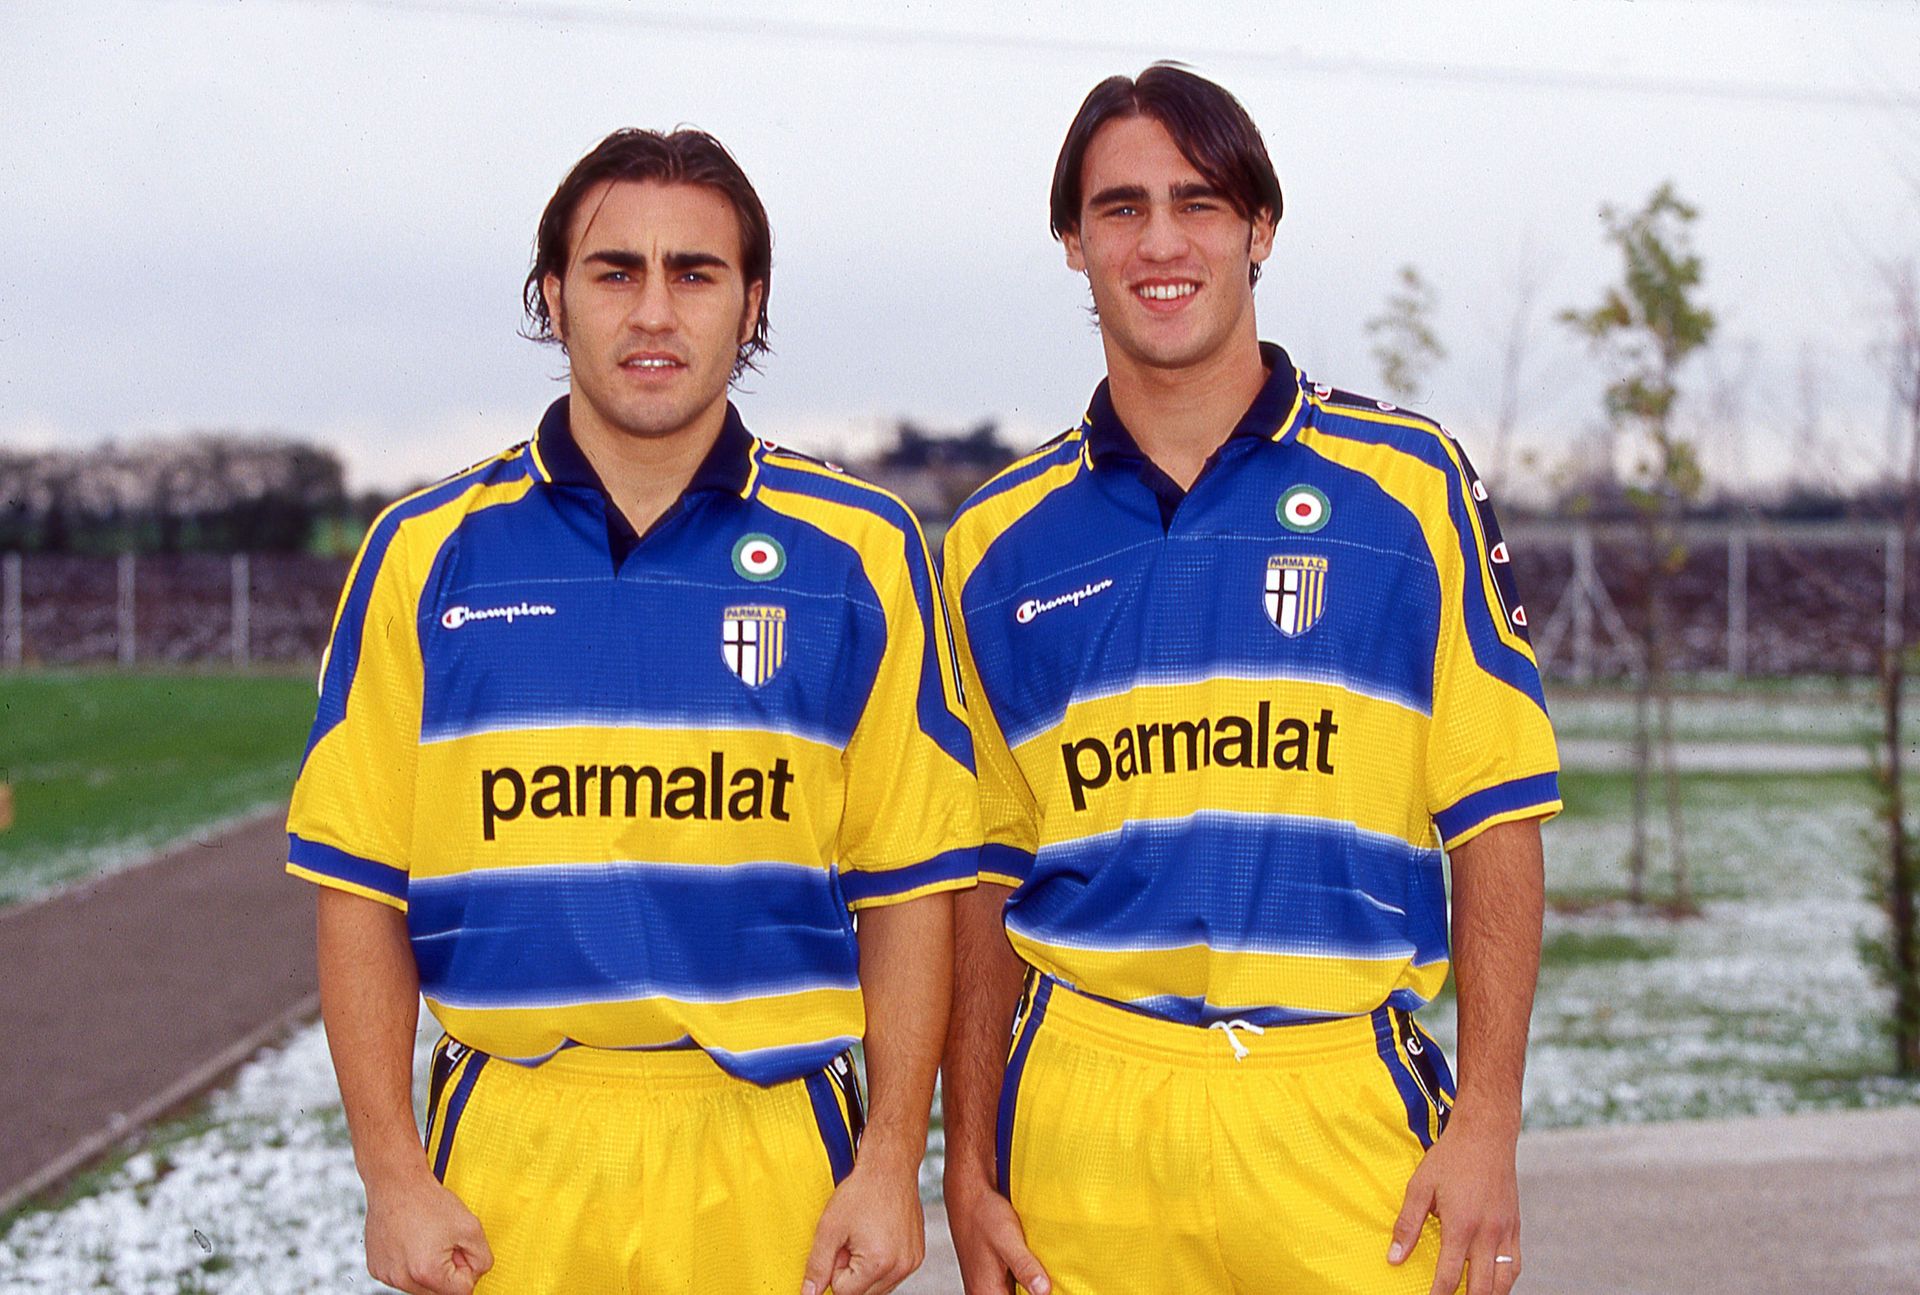 <p>                     Paolo Cannavaro made over 400 Serie A appearances for Parma, Napoli and Sassuolo and represented Italy from Under-16 to U-21 level in an impressive career.                   </p>                                      <p>                     But brother Fabio, also a central defender, was much more successful. The older man earned 136 caps for Italy, captained the Azzurri to World Cup victory in 2006 and won the Ballon d'Or.                   </p>